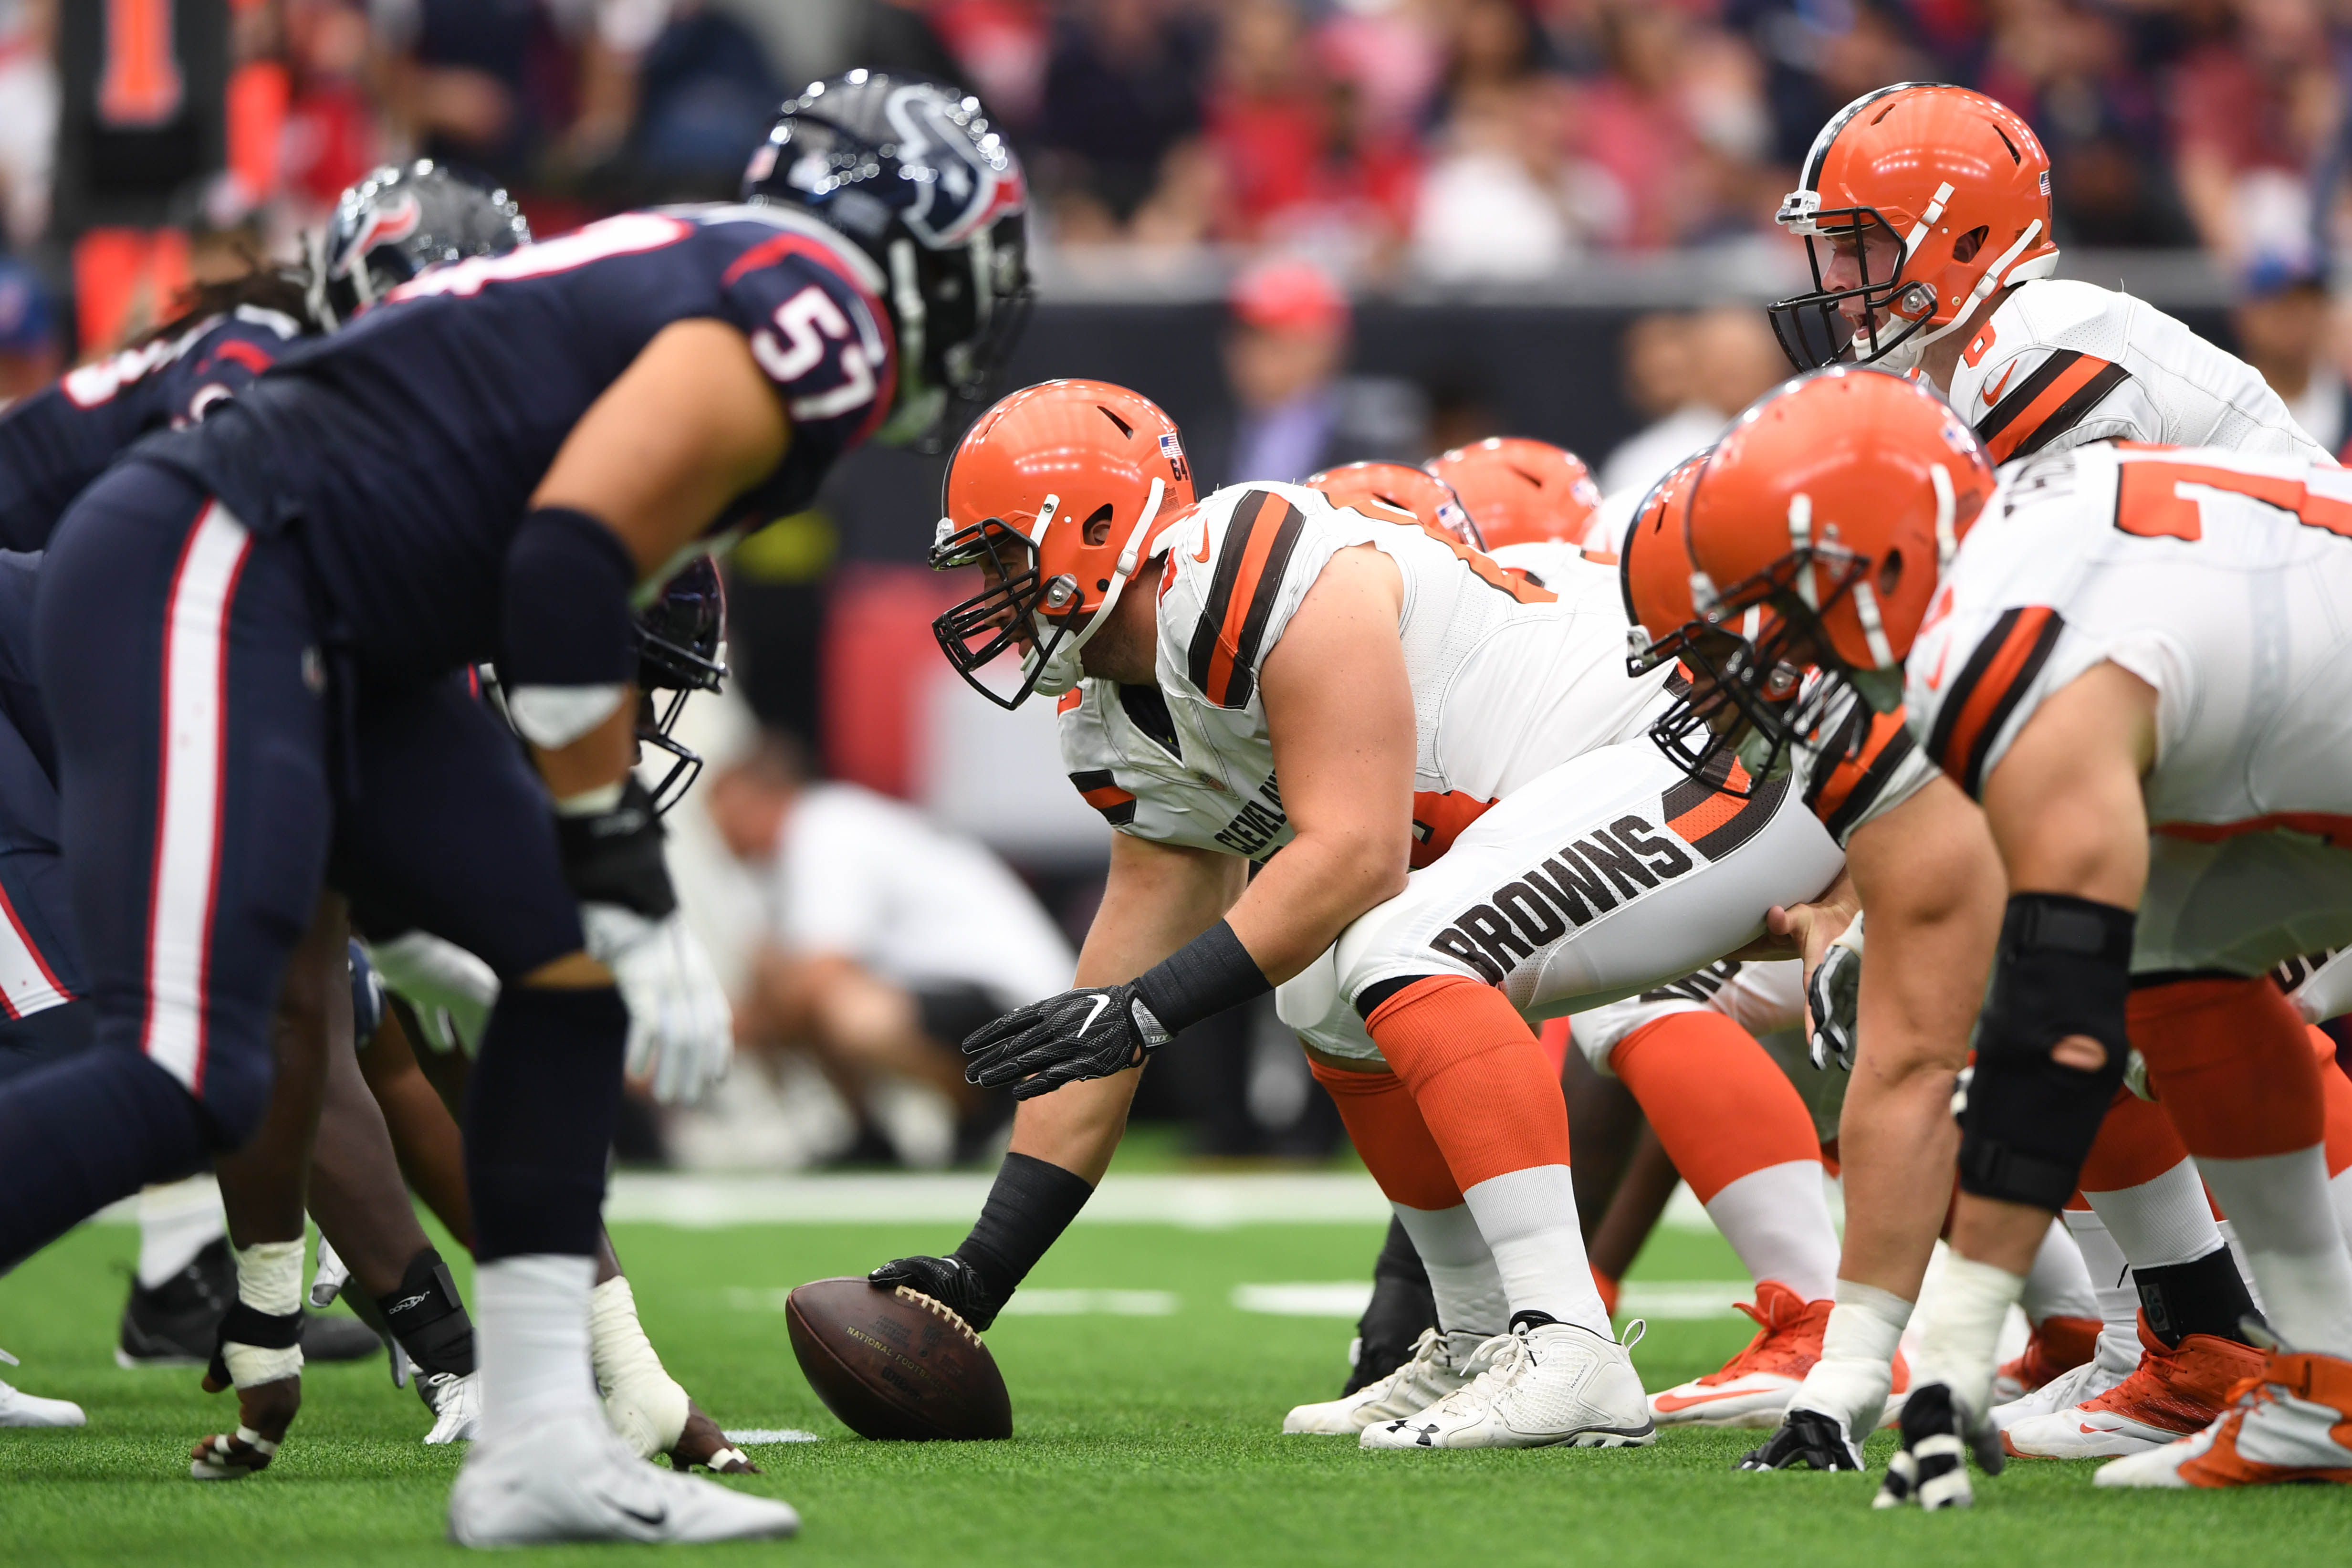 PHOTOS: Cleveland Browns face Houston Texans in AFC battle in Houston